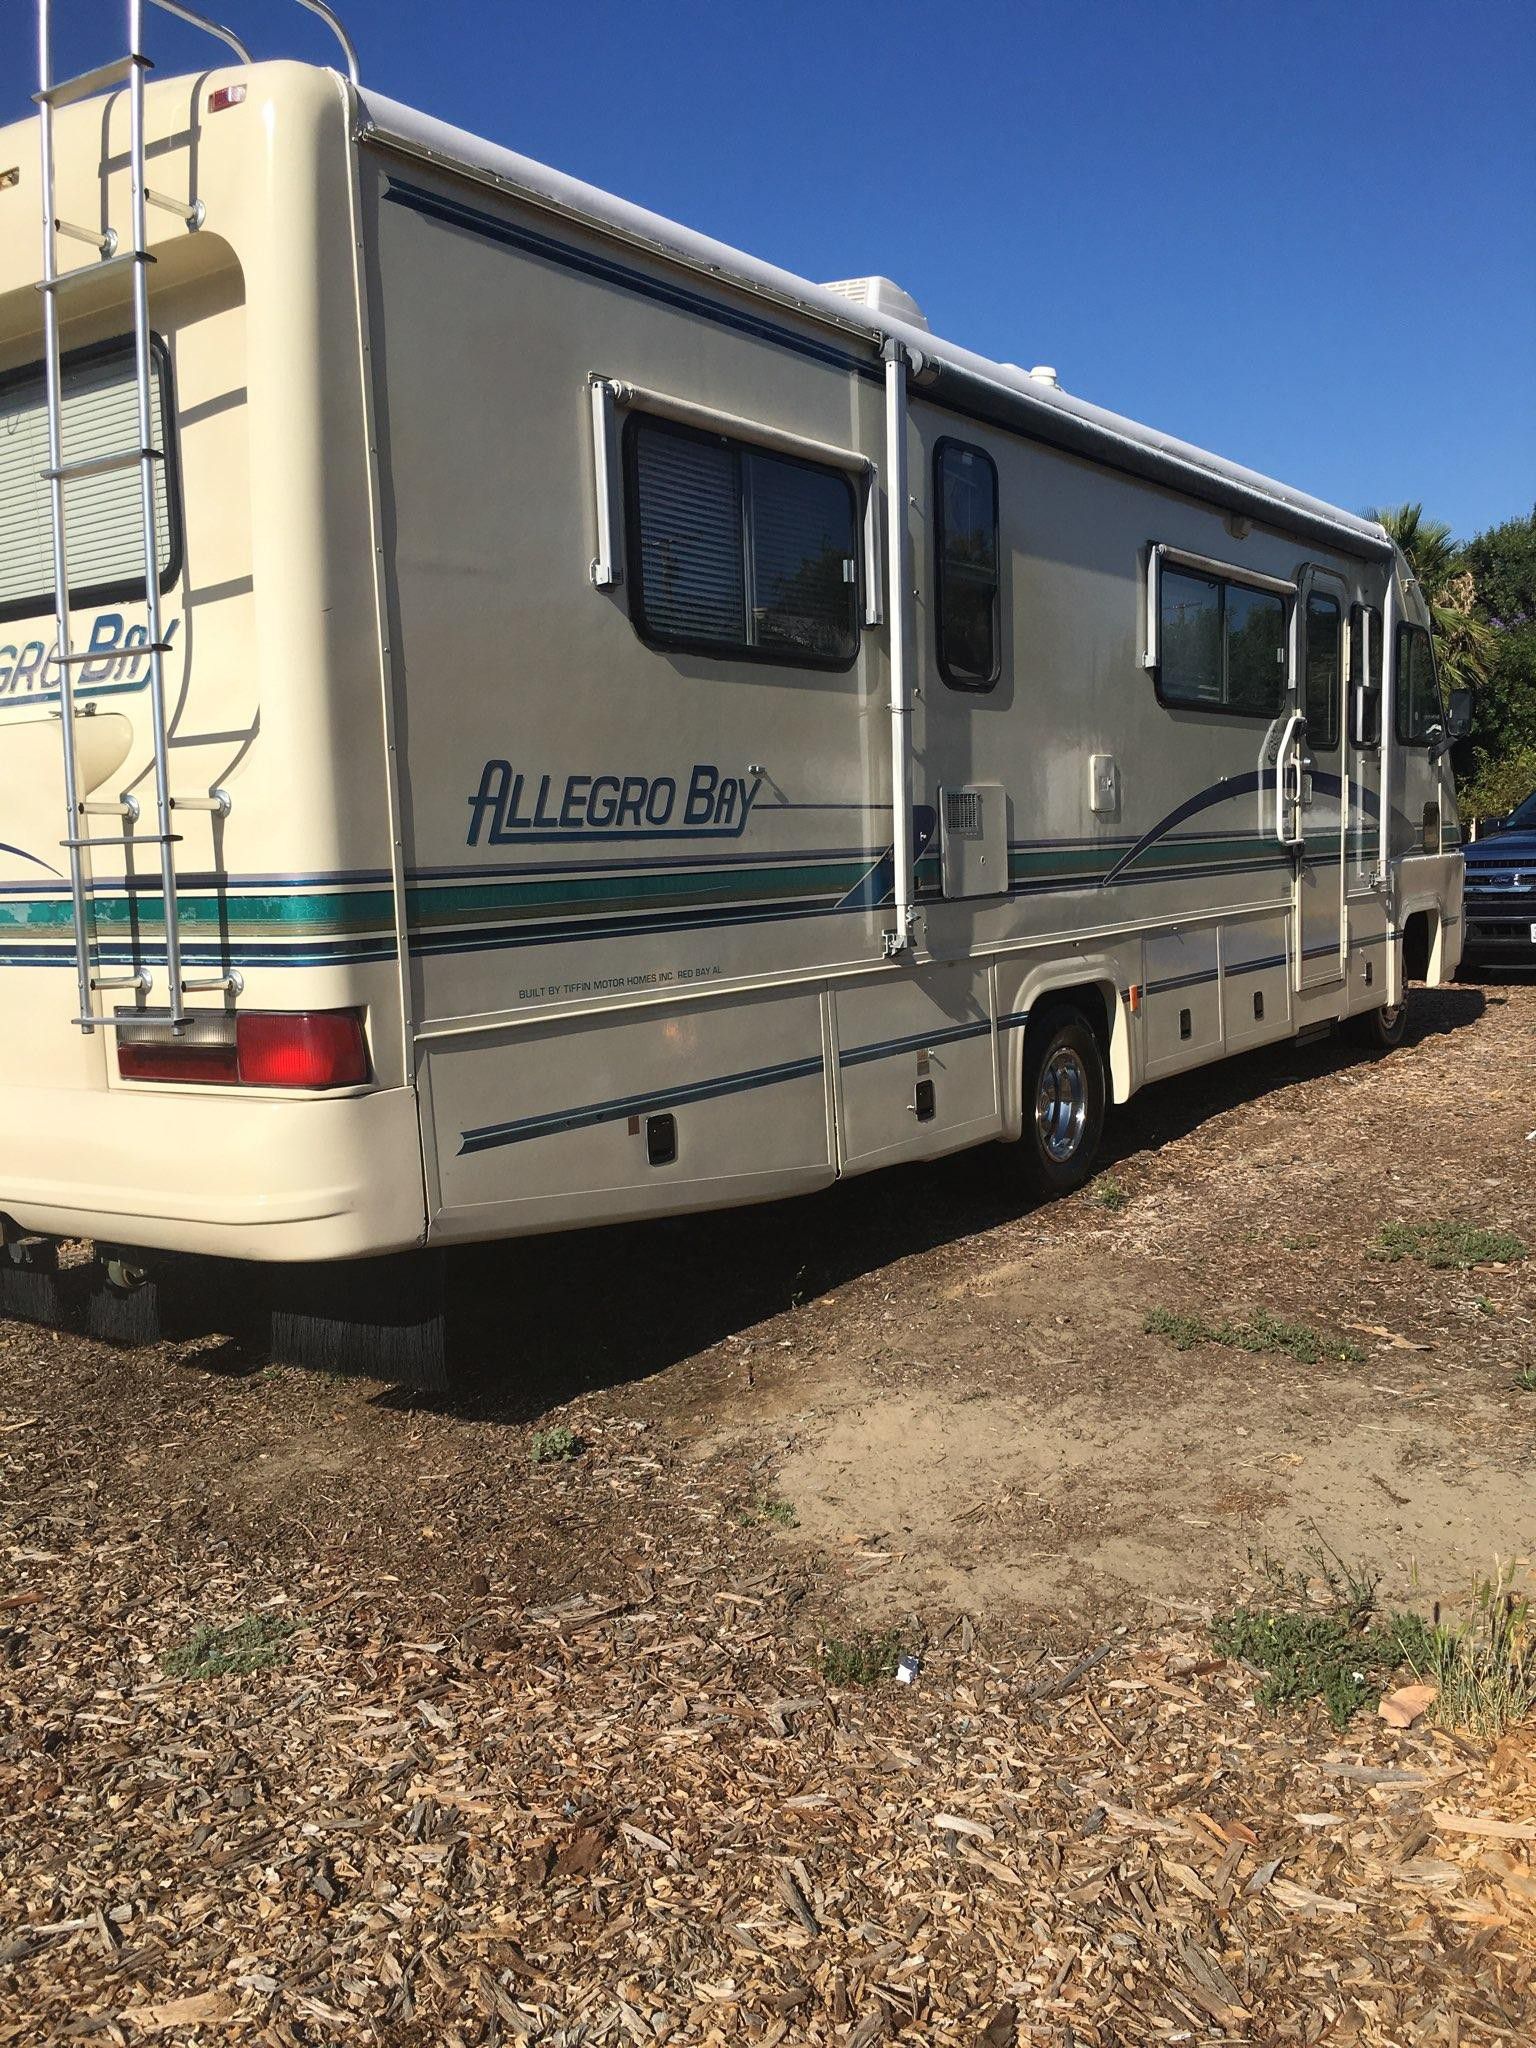 One owner 1997 Allegro Bay 30 foot with low miles class a RV